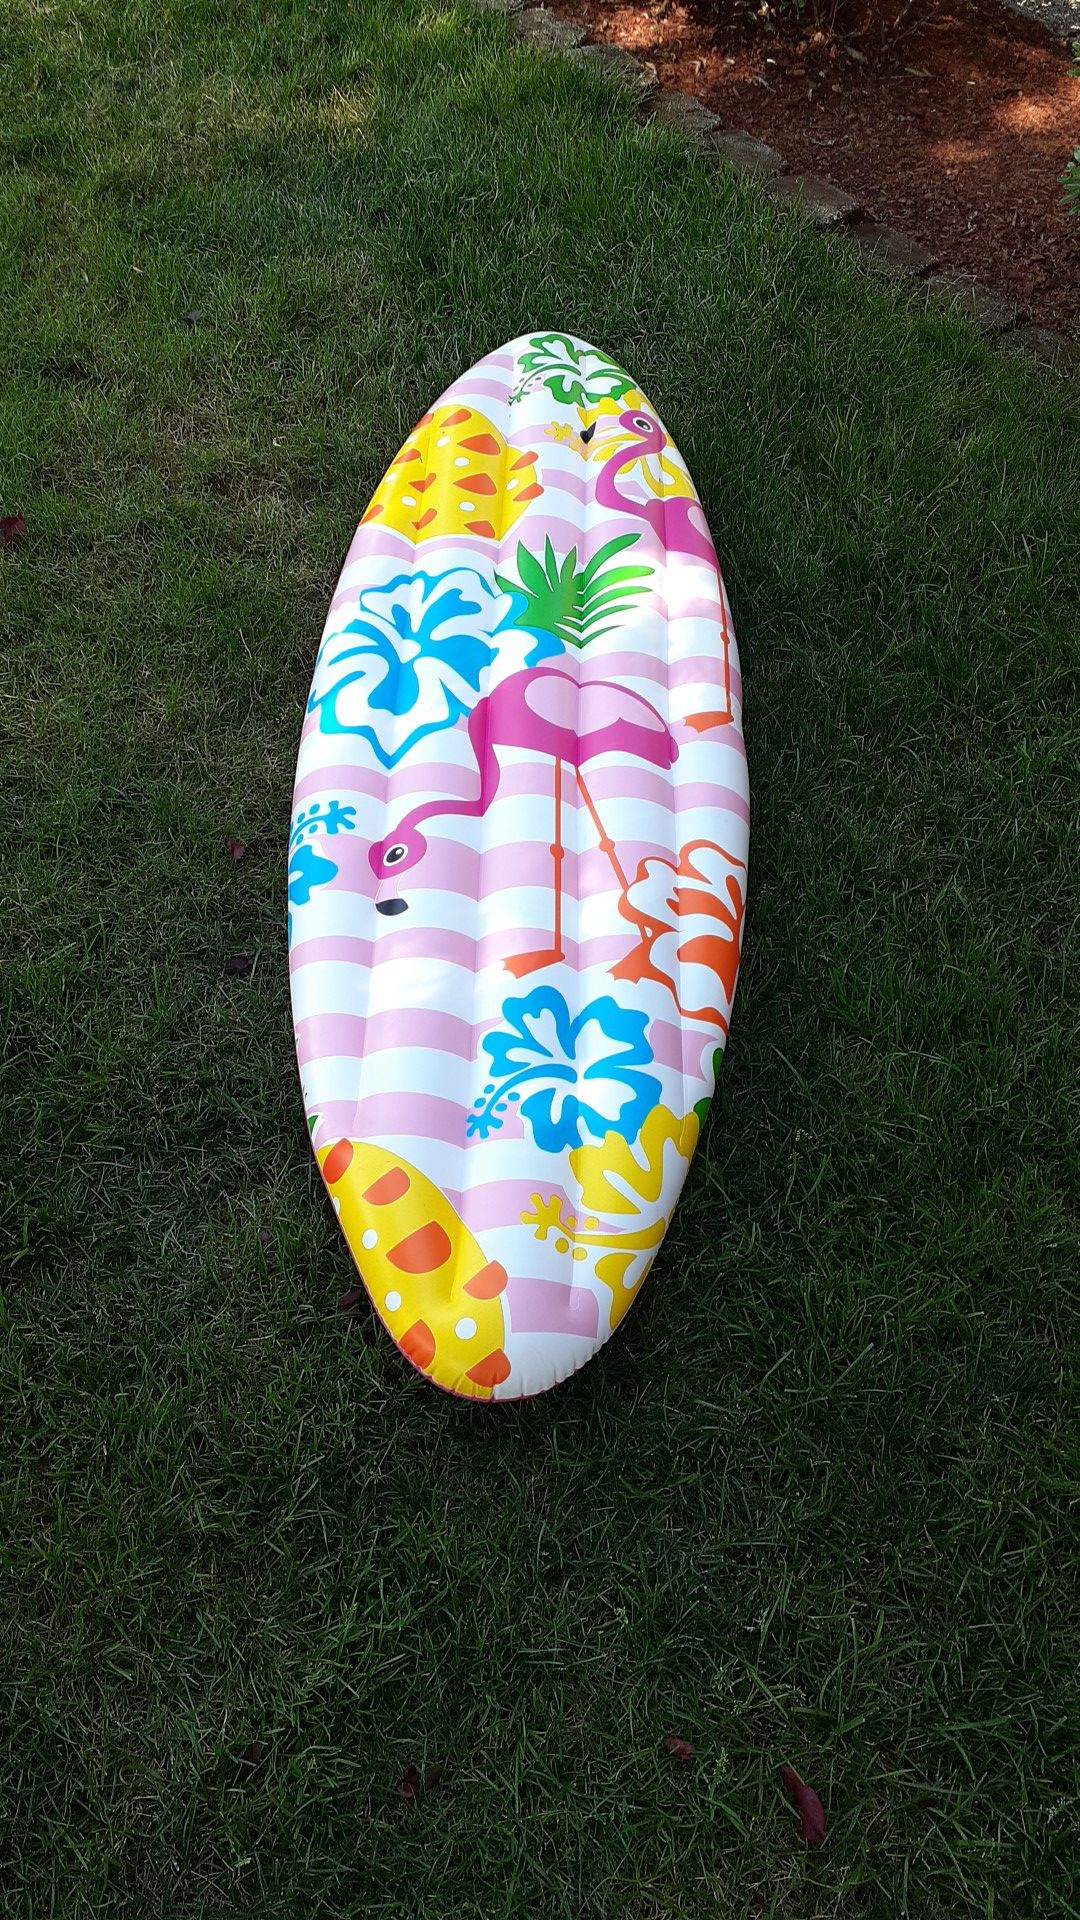 *NEW* Inflatable Surfboard Lounger